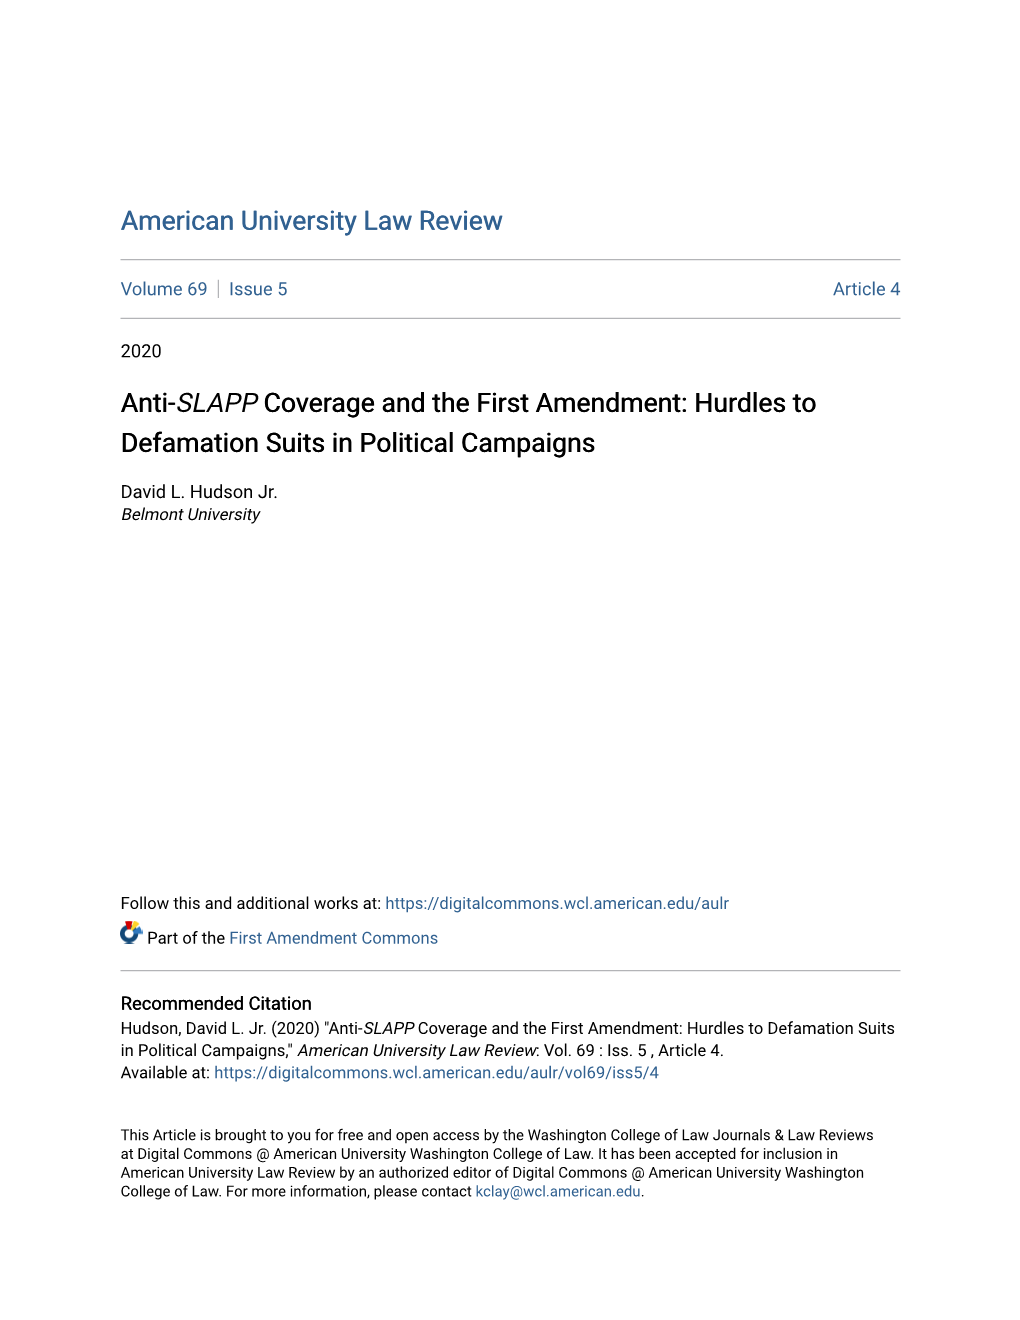 Anti-SLAPP Coverage and the First Amendment: Hurdles to Defamation Suits in Political Campaigns